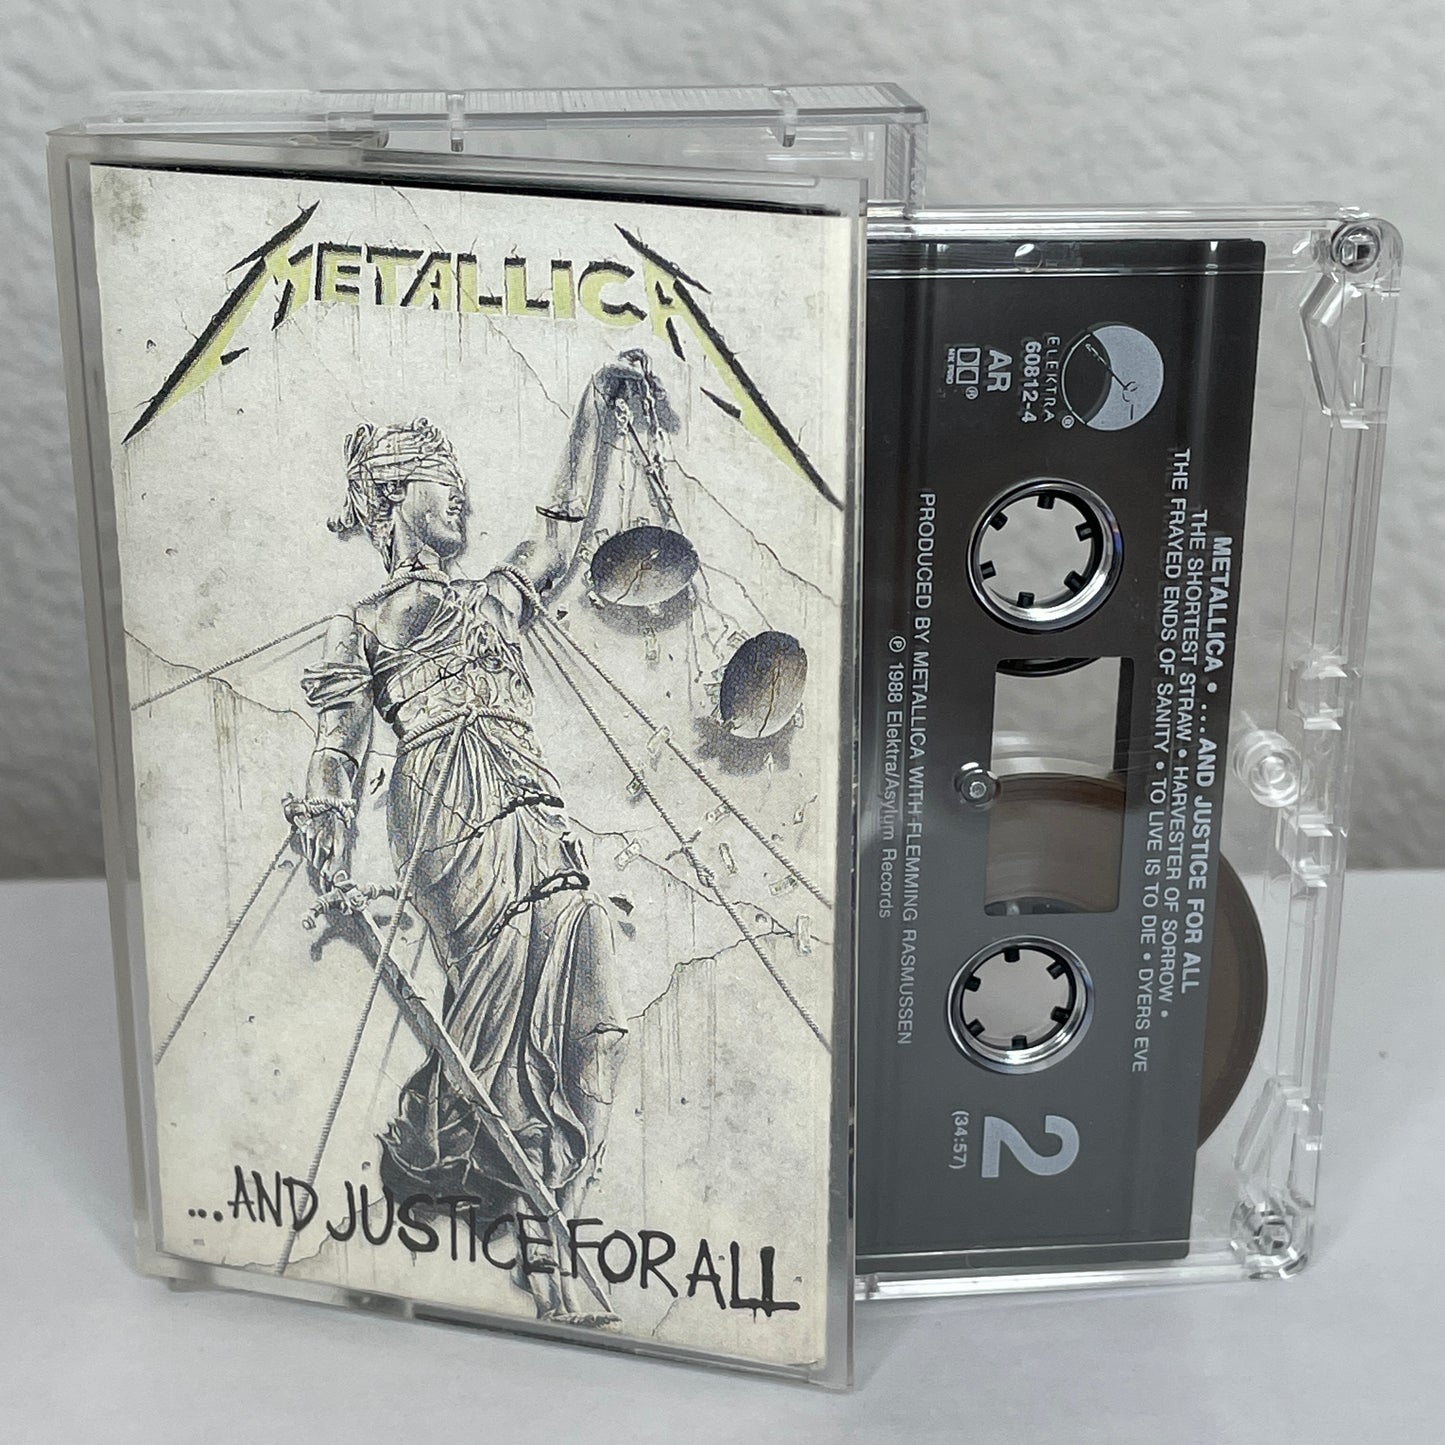 Metallica - ...And Justice For All original cassette tape